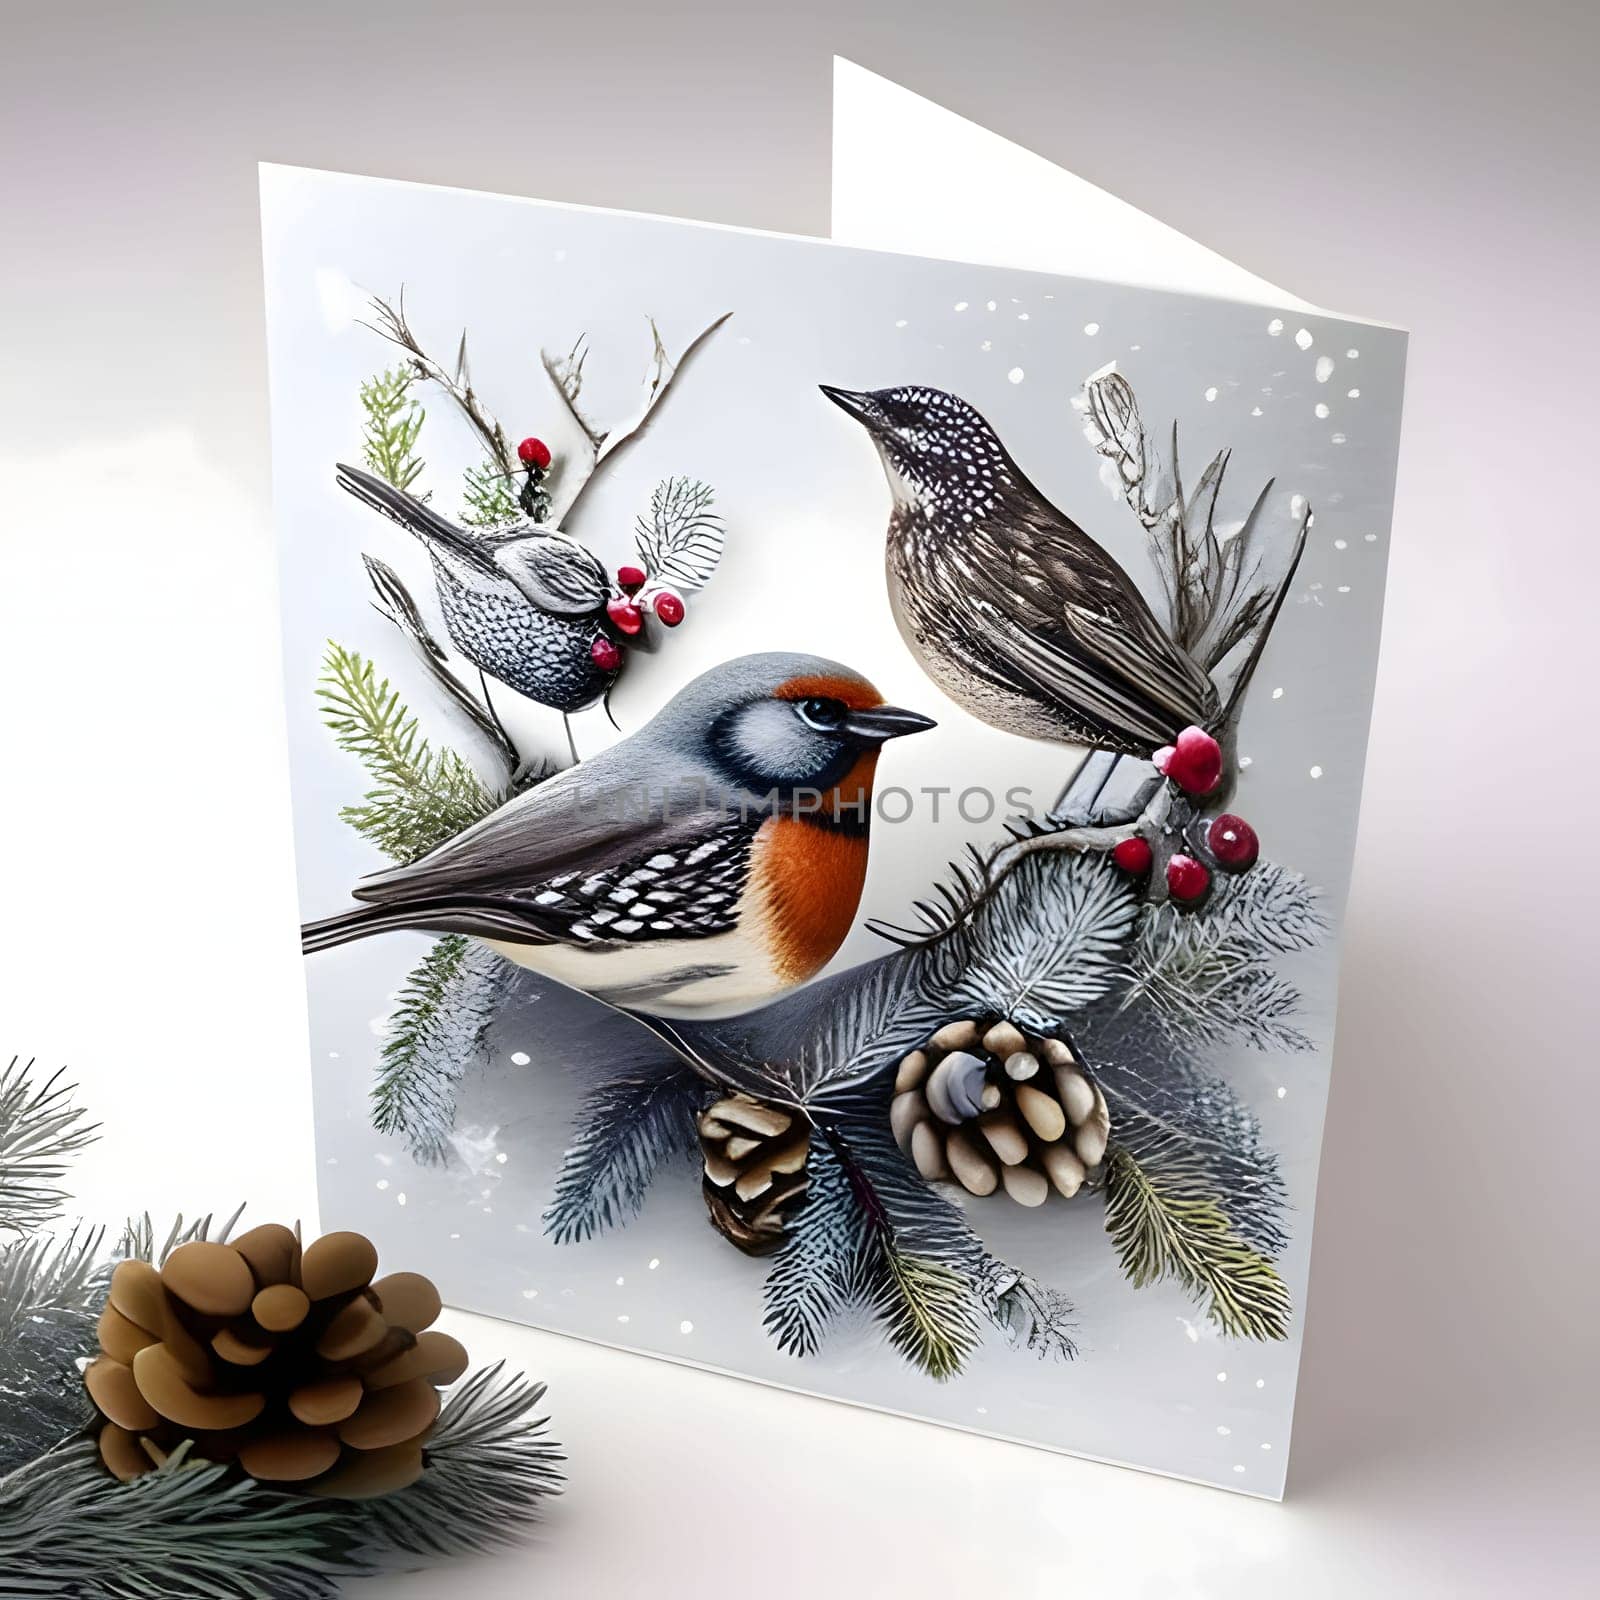 Card with birds on spruce branches. Christmas card as a symbol of remembrance of the birth of the savior. A Time of Joy and Celebration.